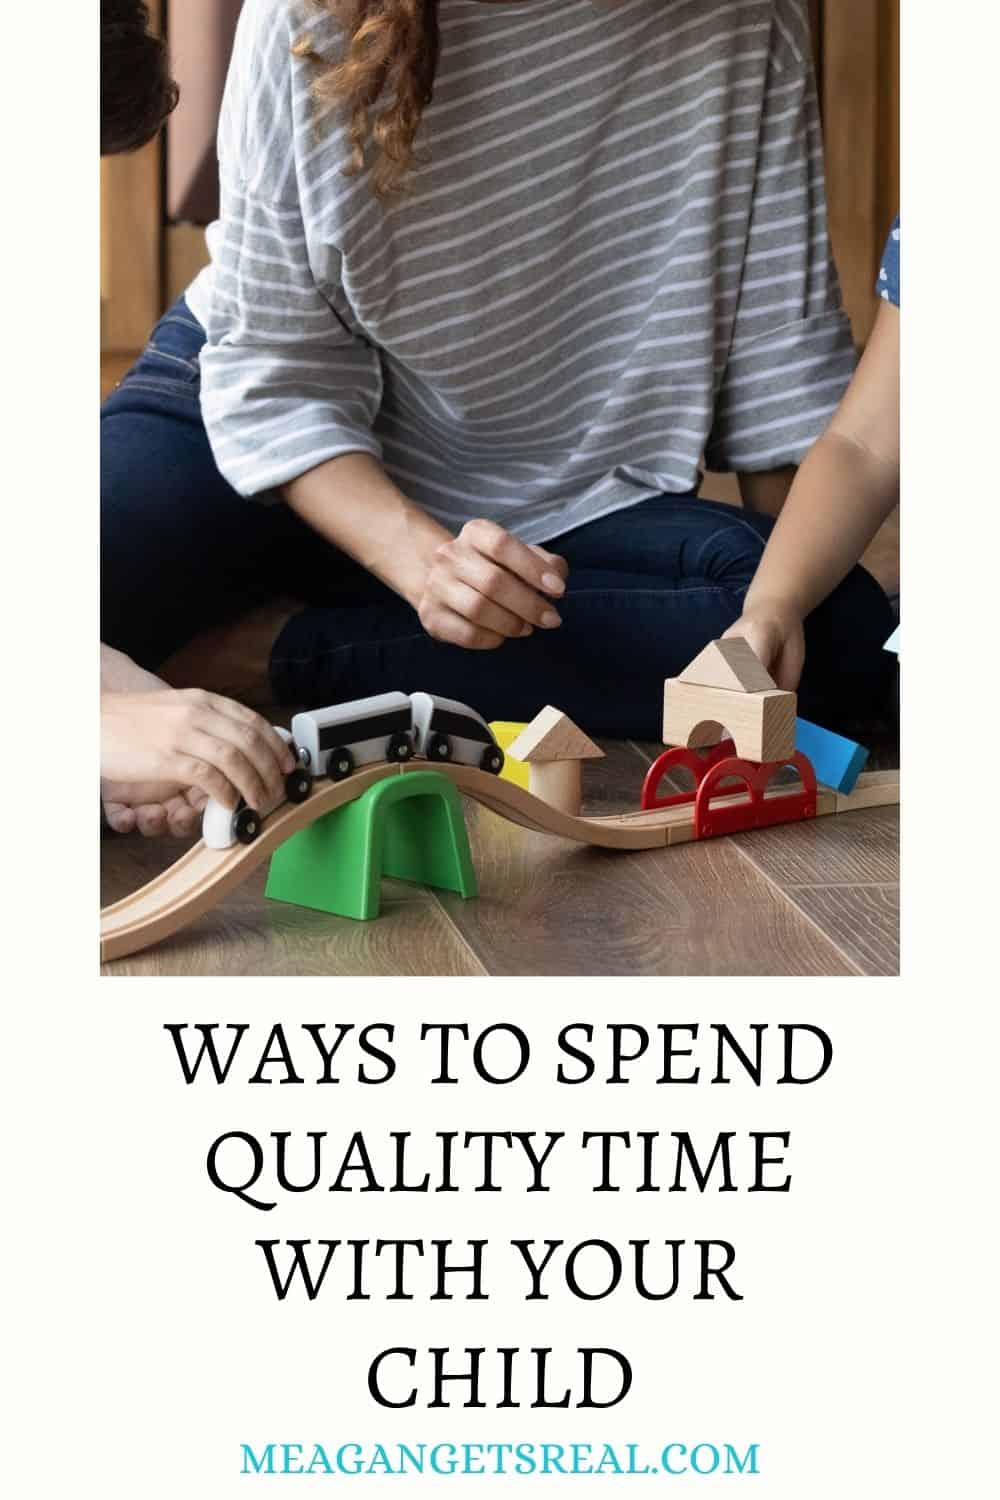 Ways to Spend Quality Time With Your Child